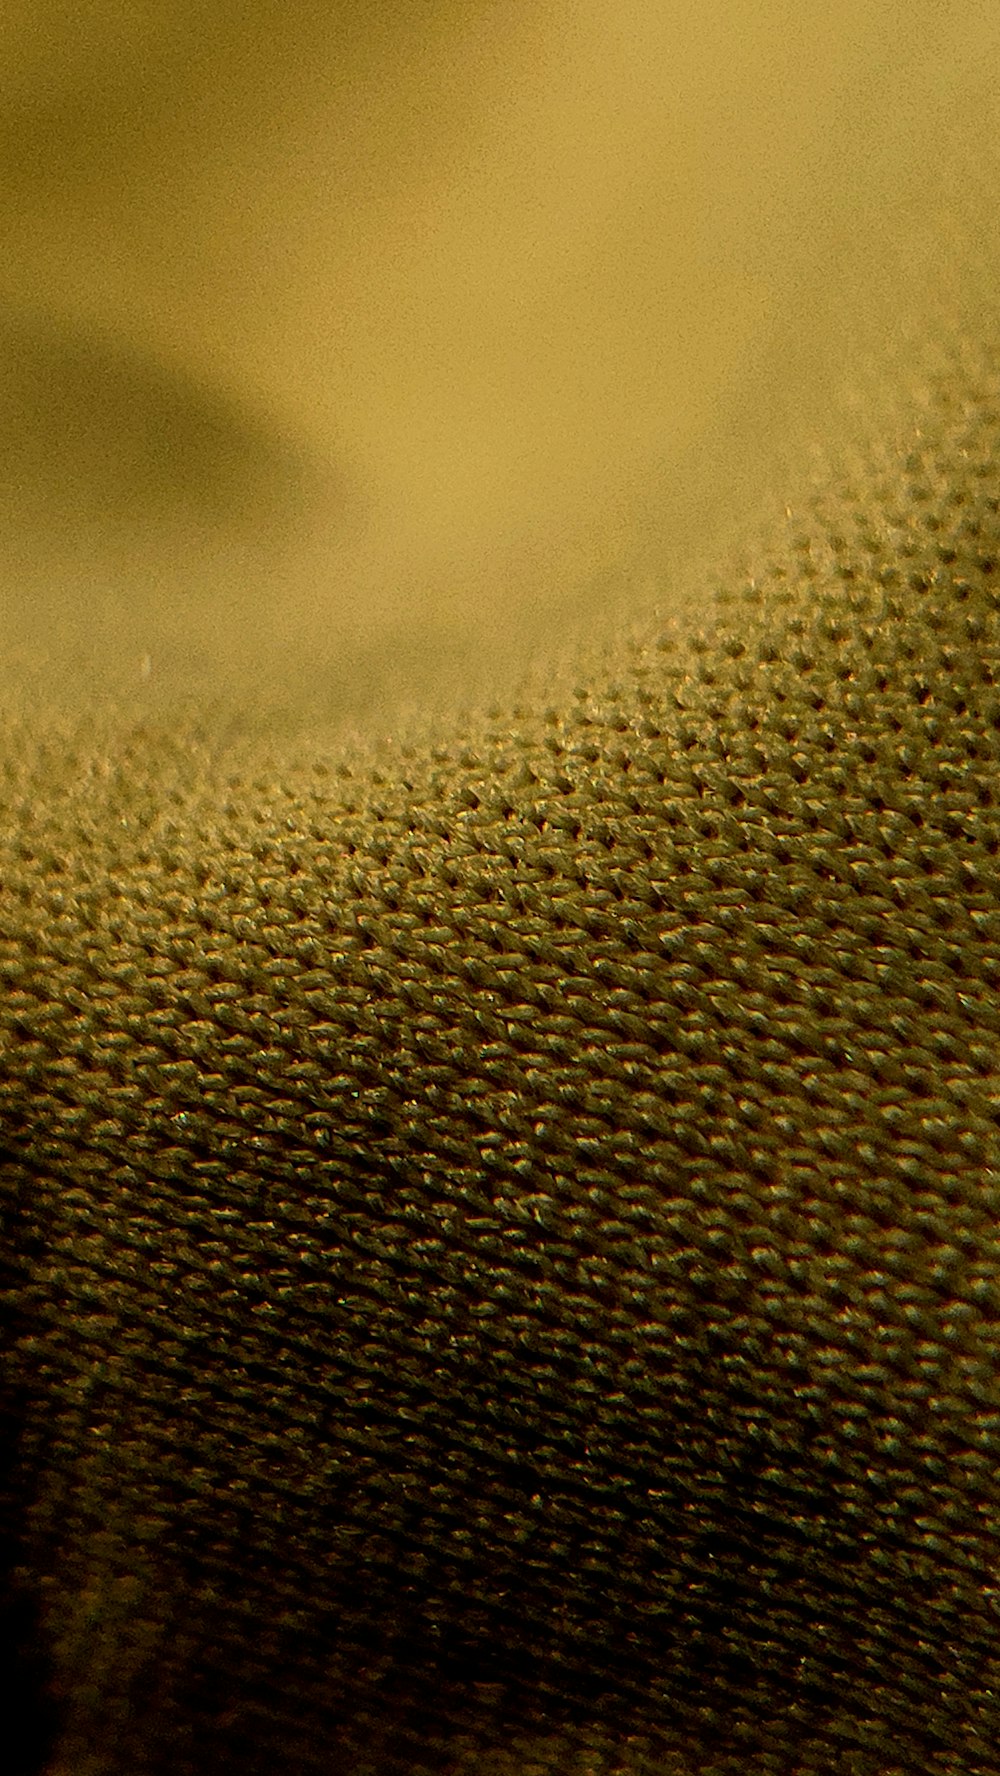 a close up view of a fabric material